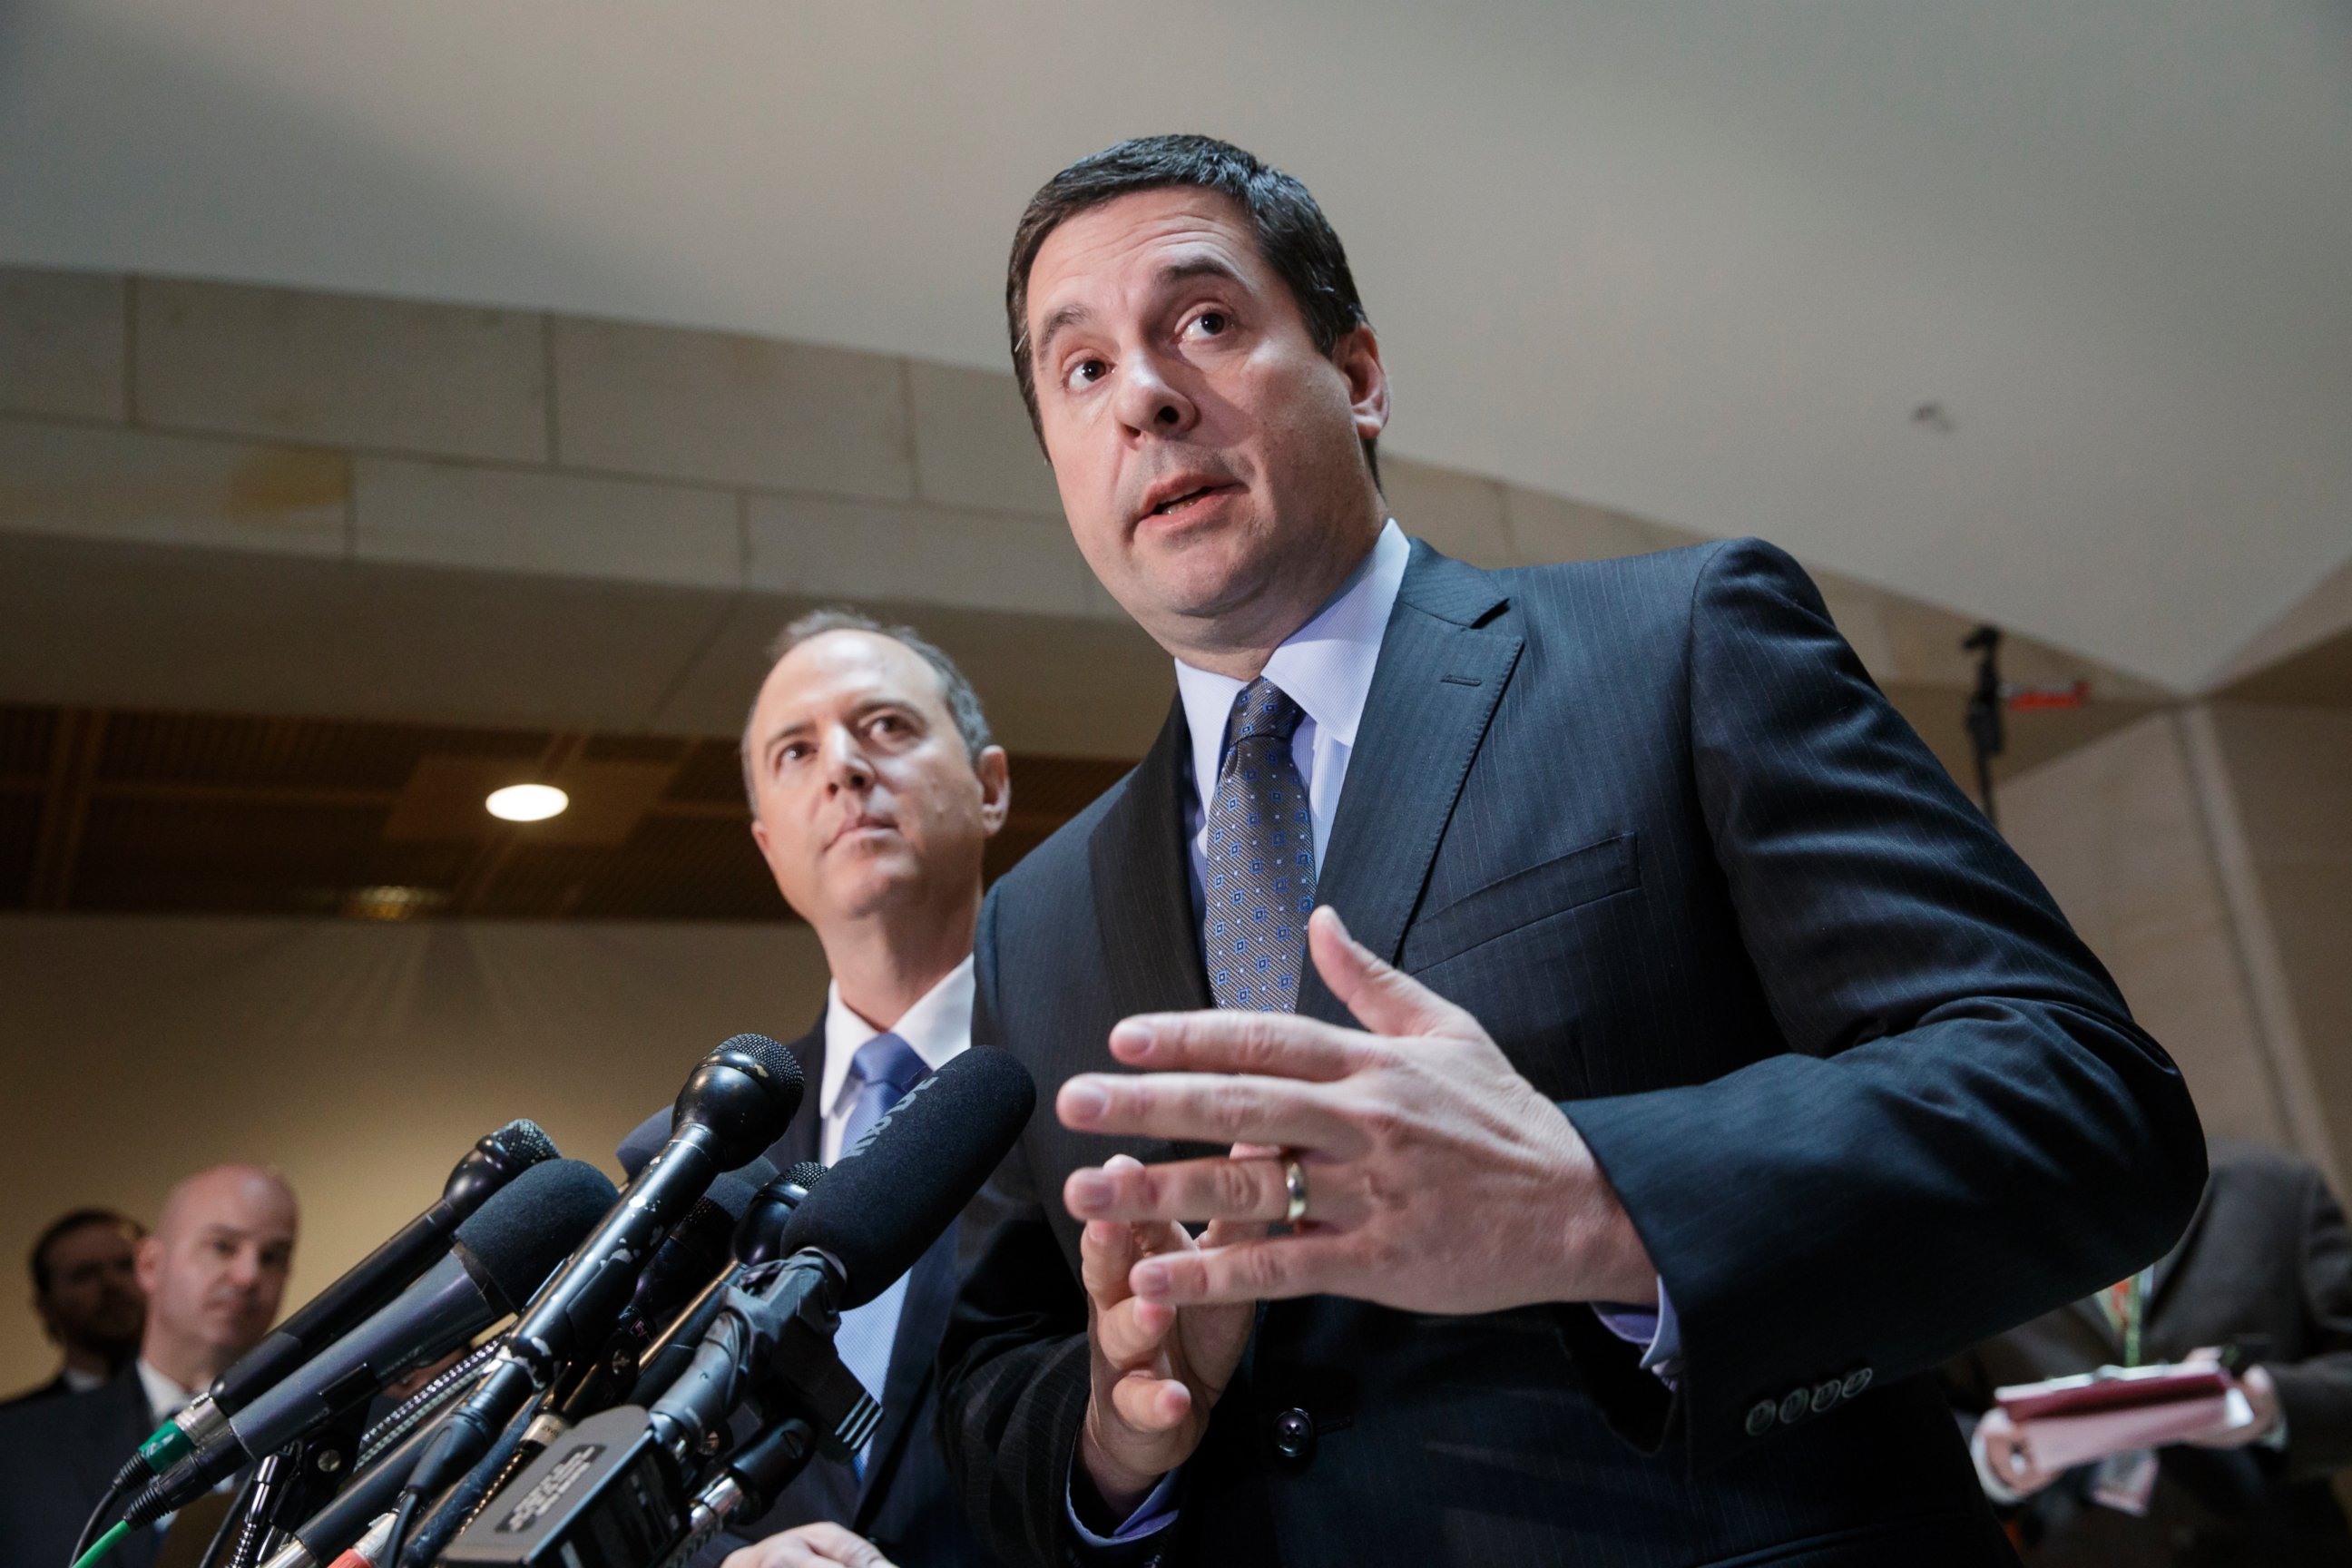 PHOTO: House Intelligence Committee Chairman Rep. Devin Nunes, R-Calif., right, accompanied by the committee's ranking member, Rep. Adam Schiff, D-Calif., talk to reporters, on Capitol Hill in Washington, March, 15, 2017.